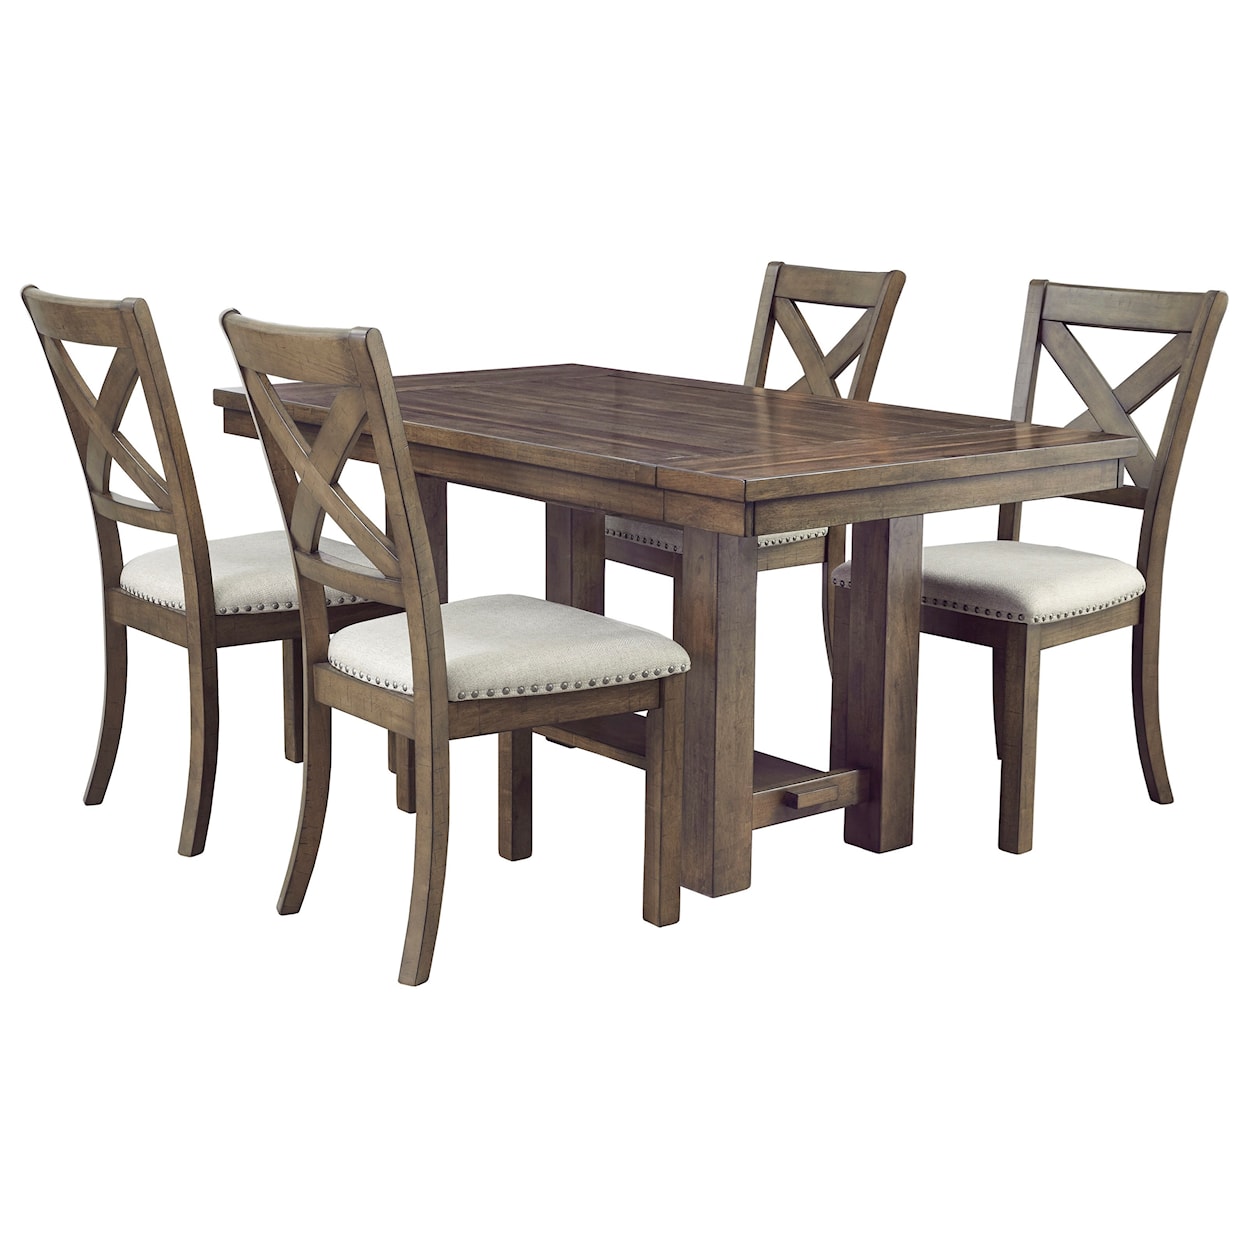 Signature Design by Ashley Moriville 5-Piece Table and Chair Set